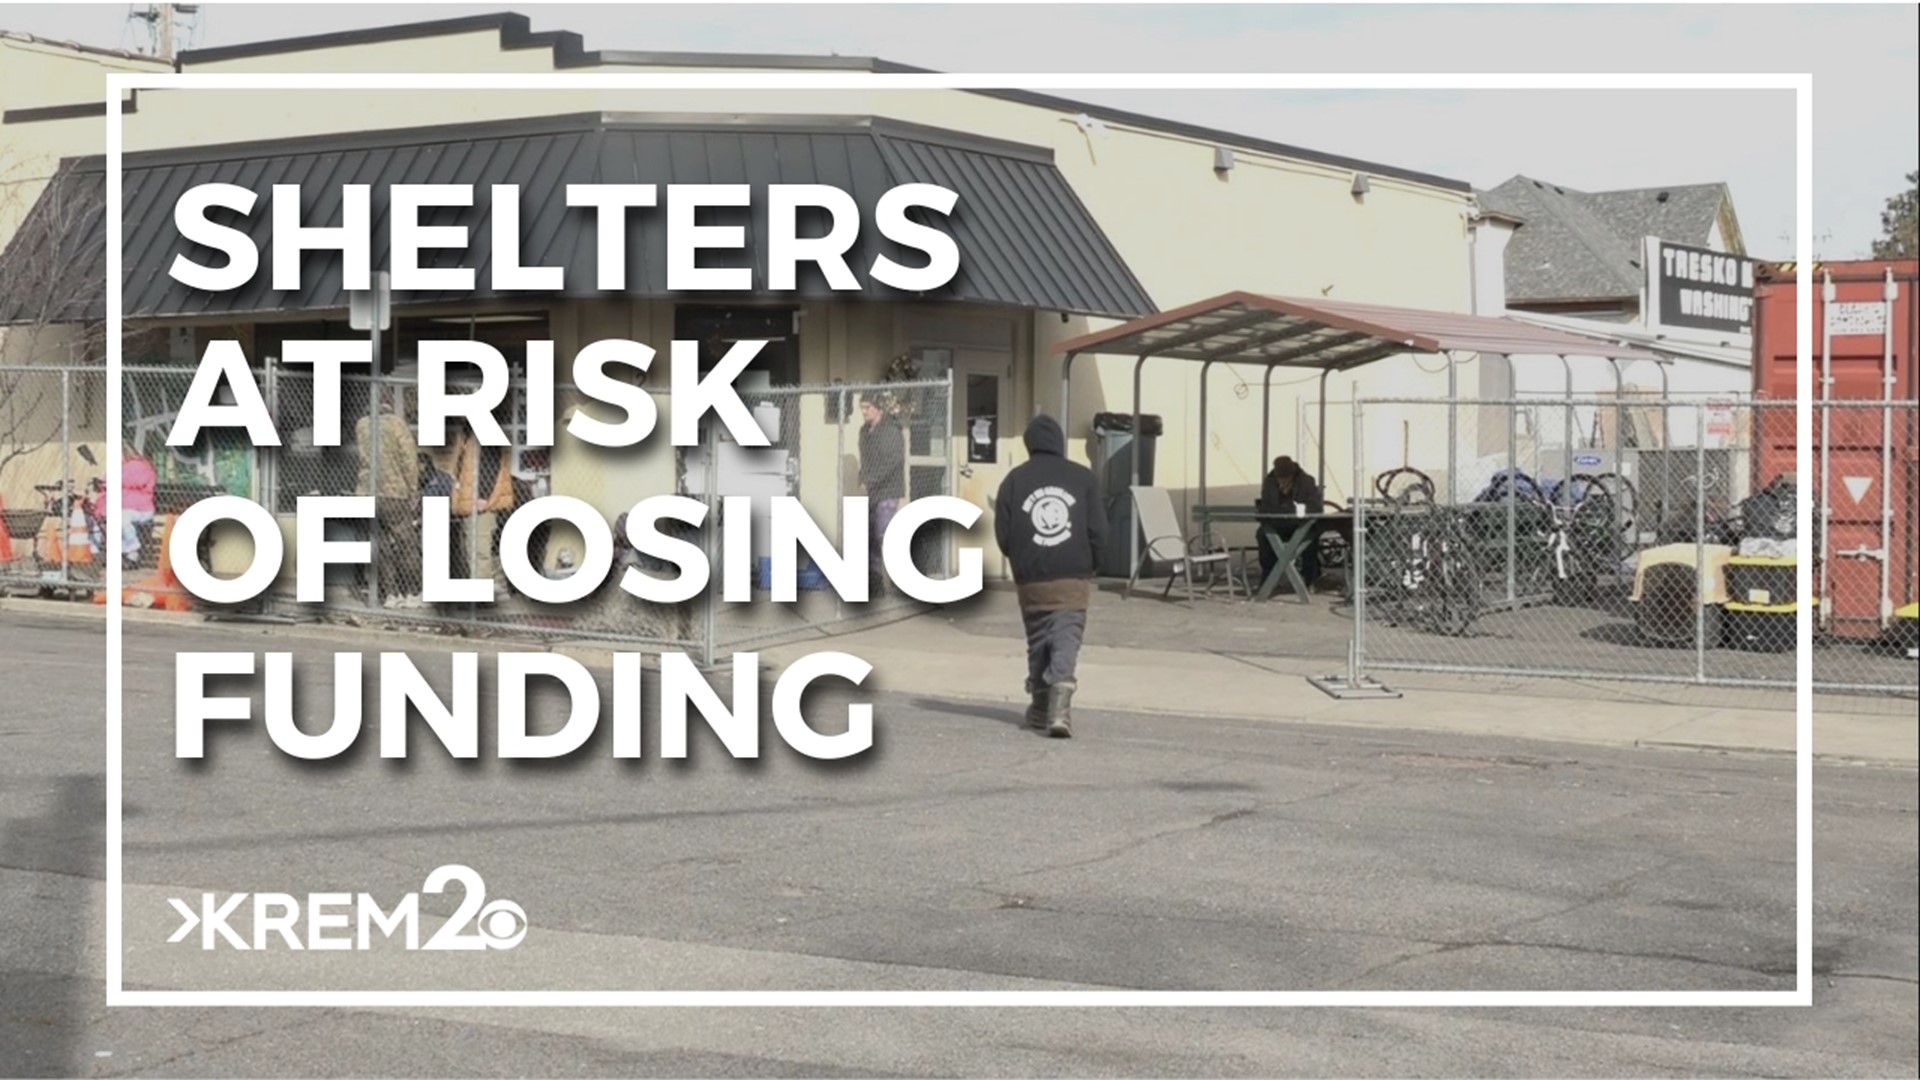 This year, the city is facing a $4 million deficit for operational expenses at two city shelters. In 2024, that deficit jumps to $10 million.